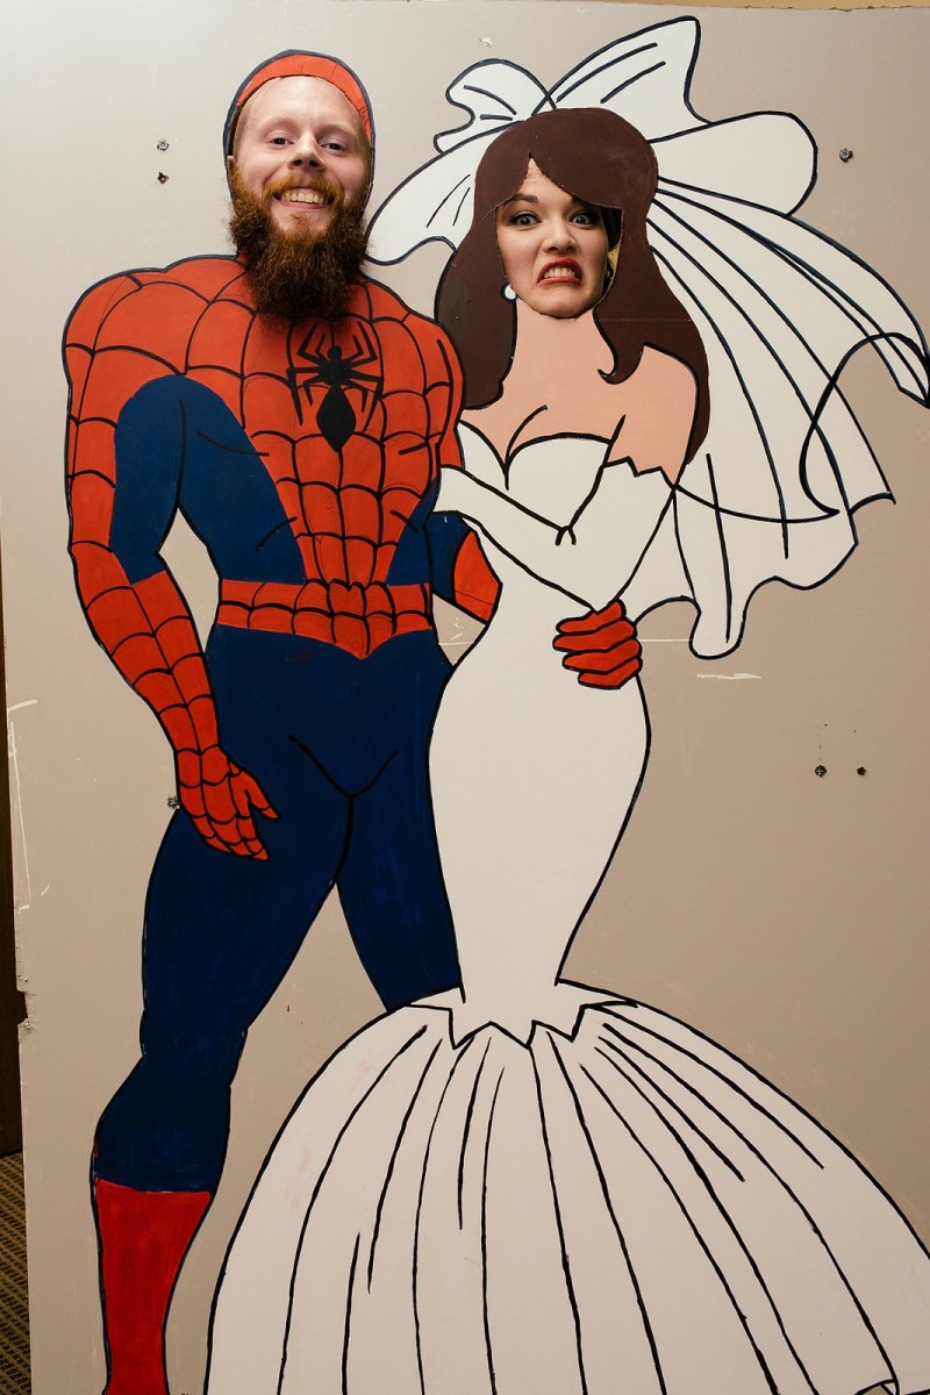 wedding-photo-face-cut-out-photo-booth